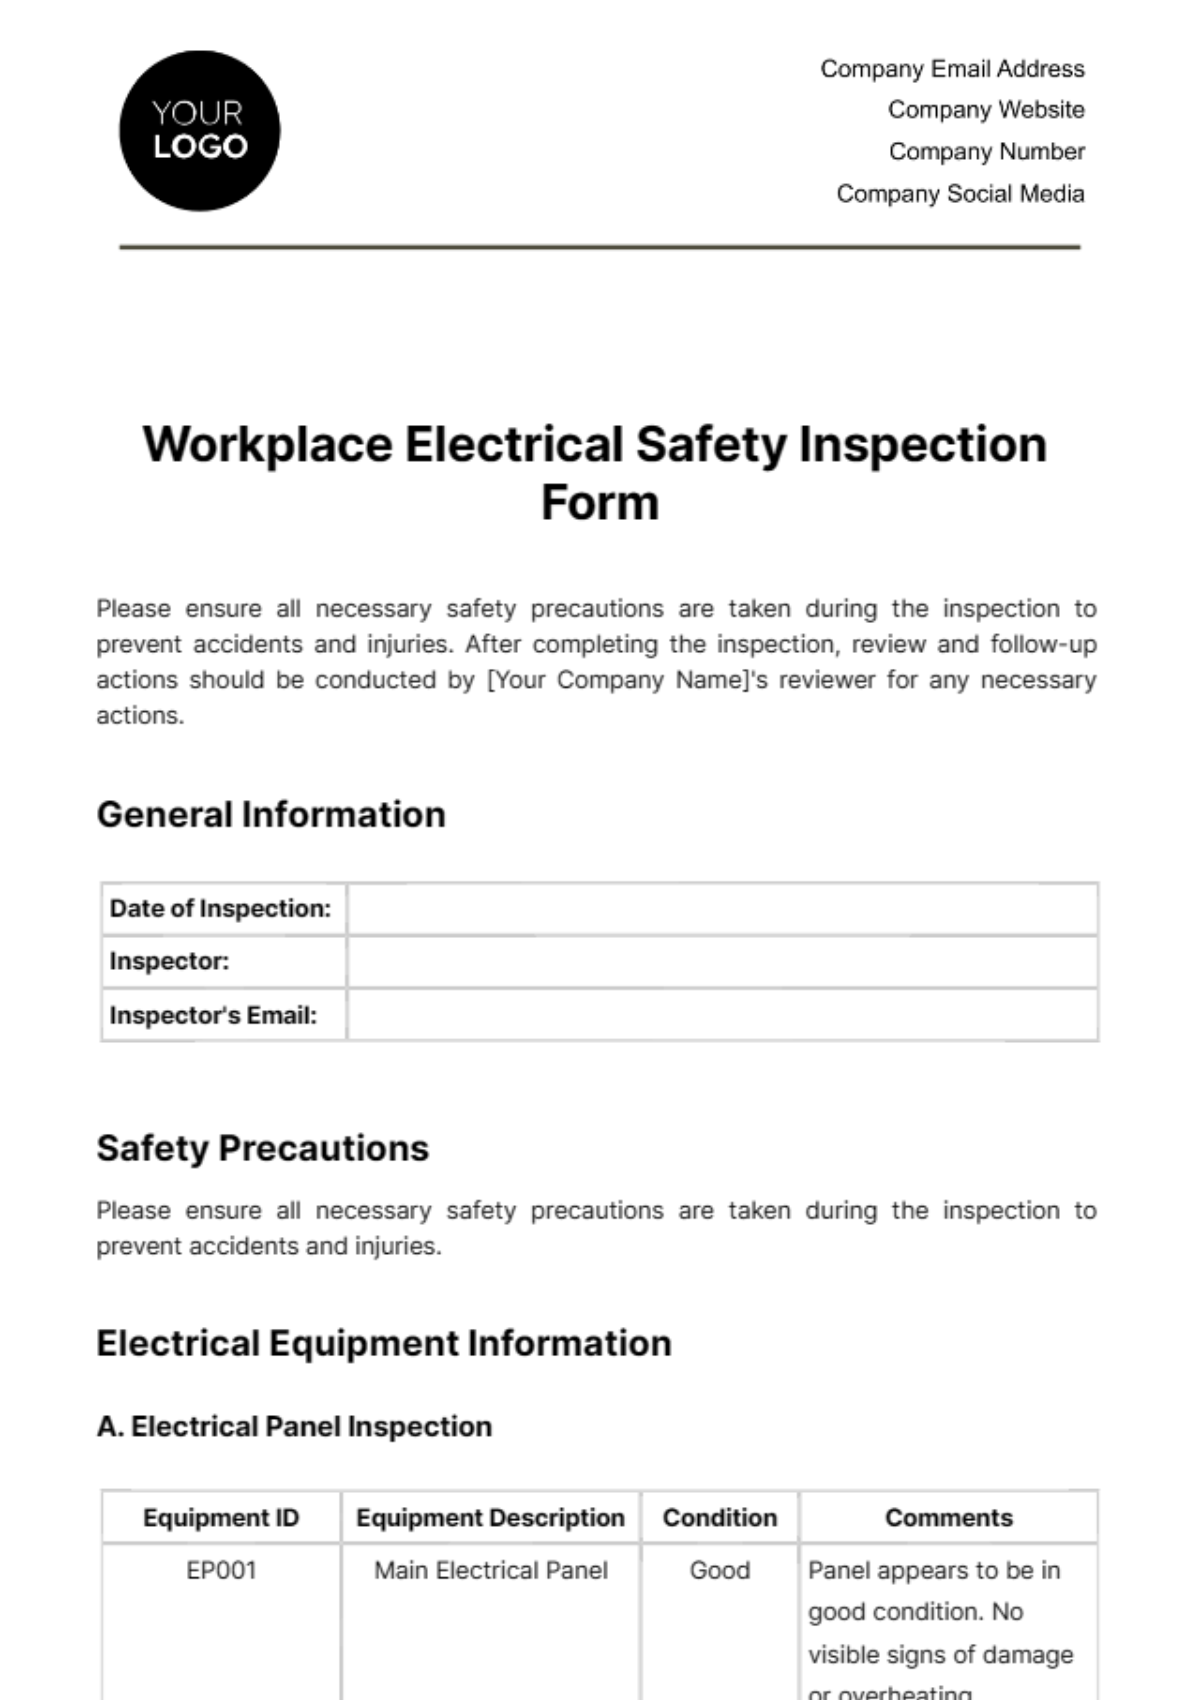 Free Workplace Electrical Safety Inspection Form Template